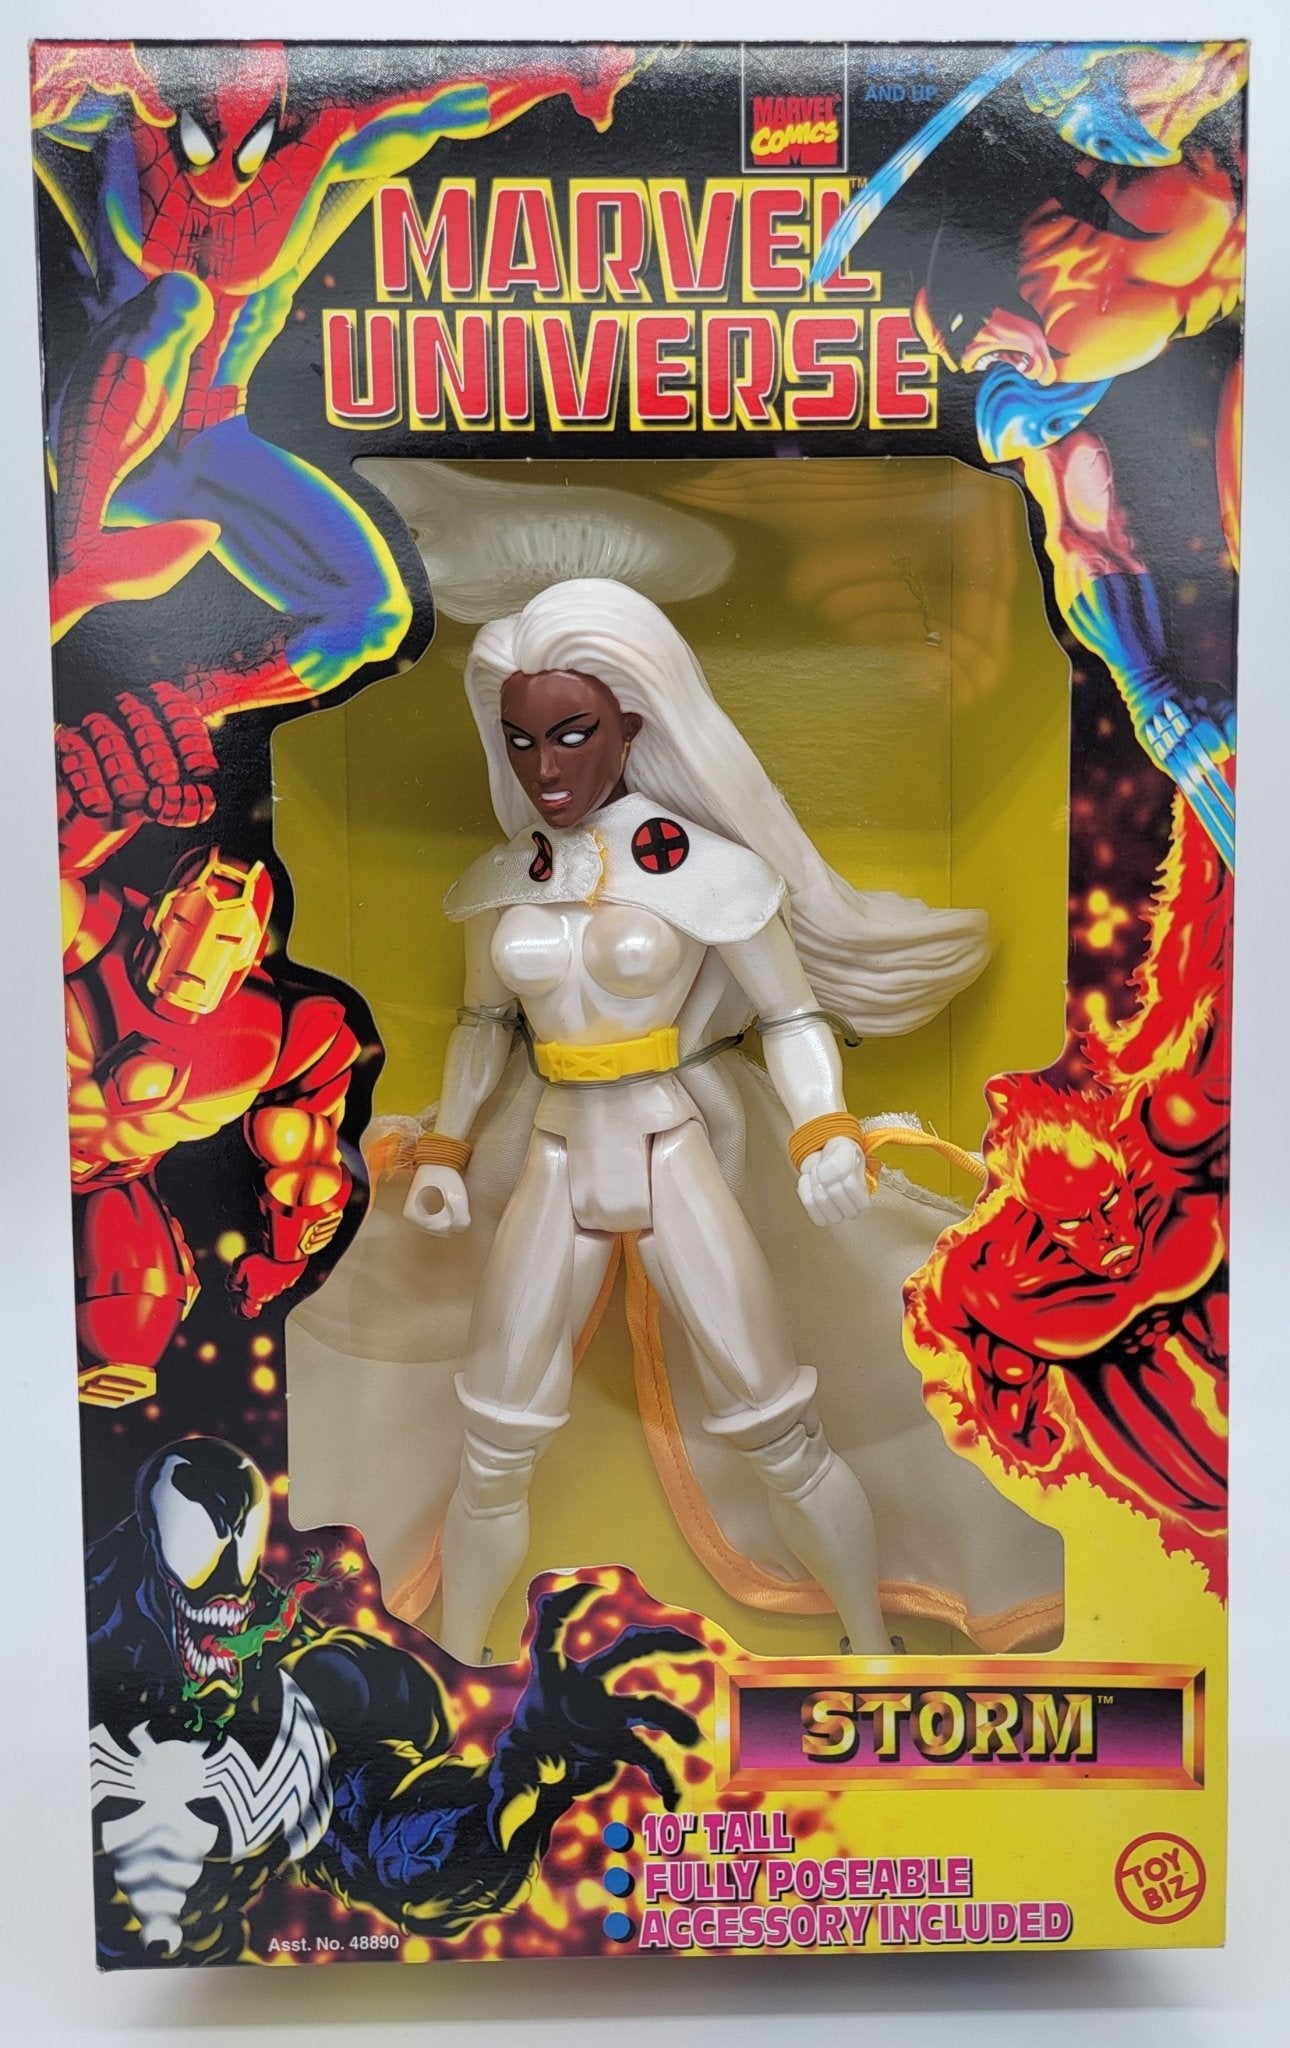 Toy Biz - Toy Biz | Marvel Universe - Storm 1997 | 10" Tall Fully Poseable | Vintage Action Figure - Action Figures - Steady Bunny Shop